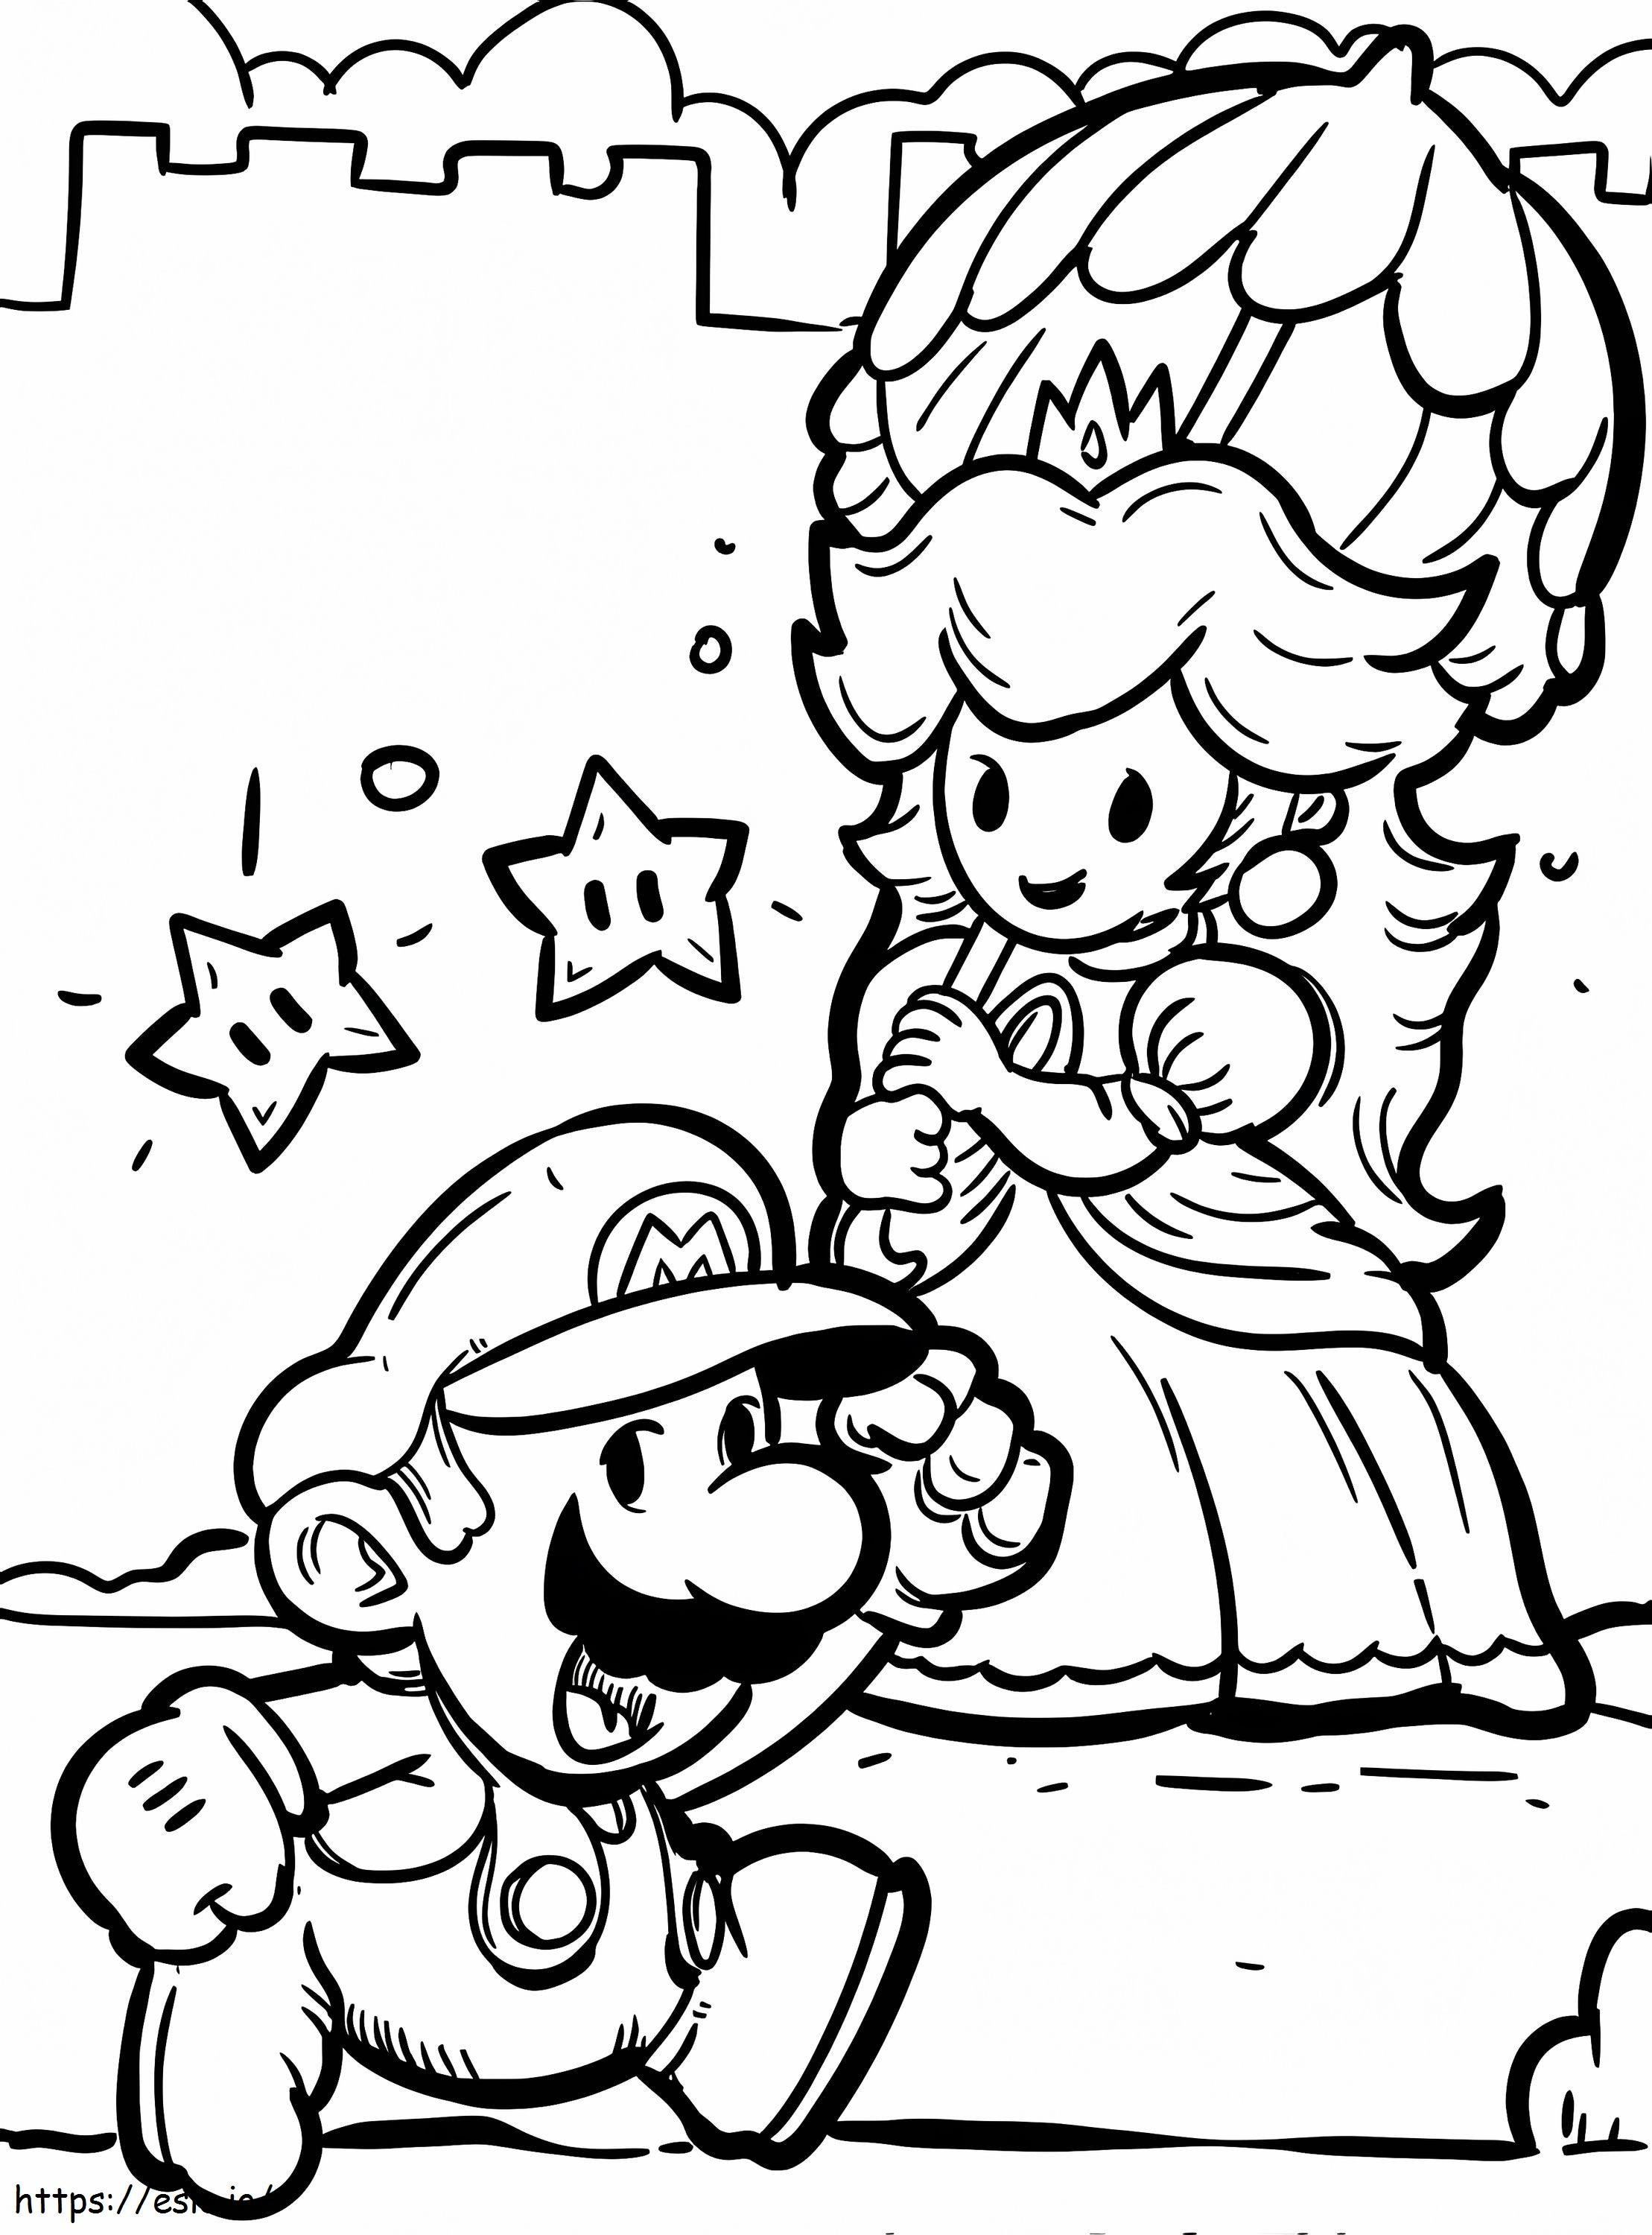 Peach And Super Mario coloring page